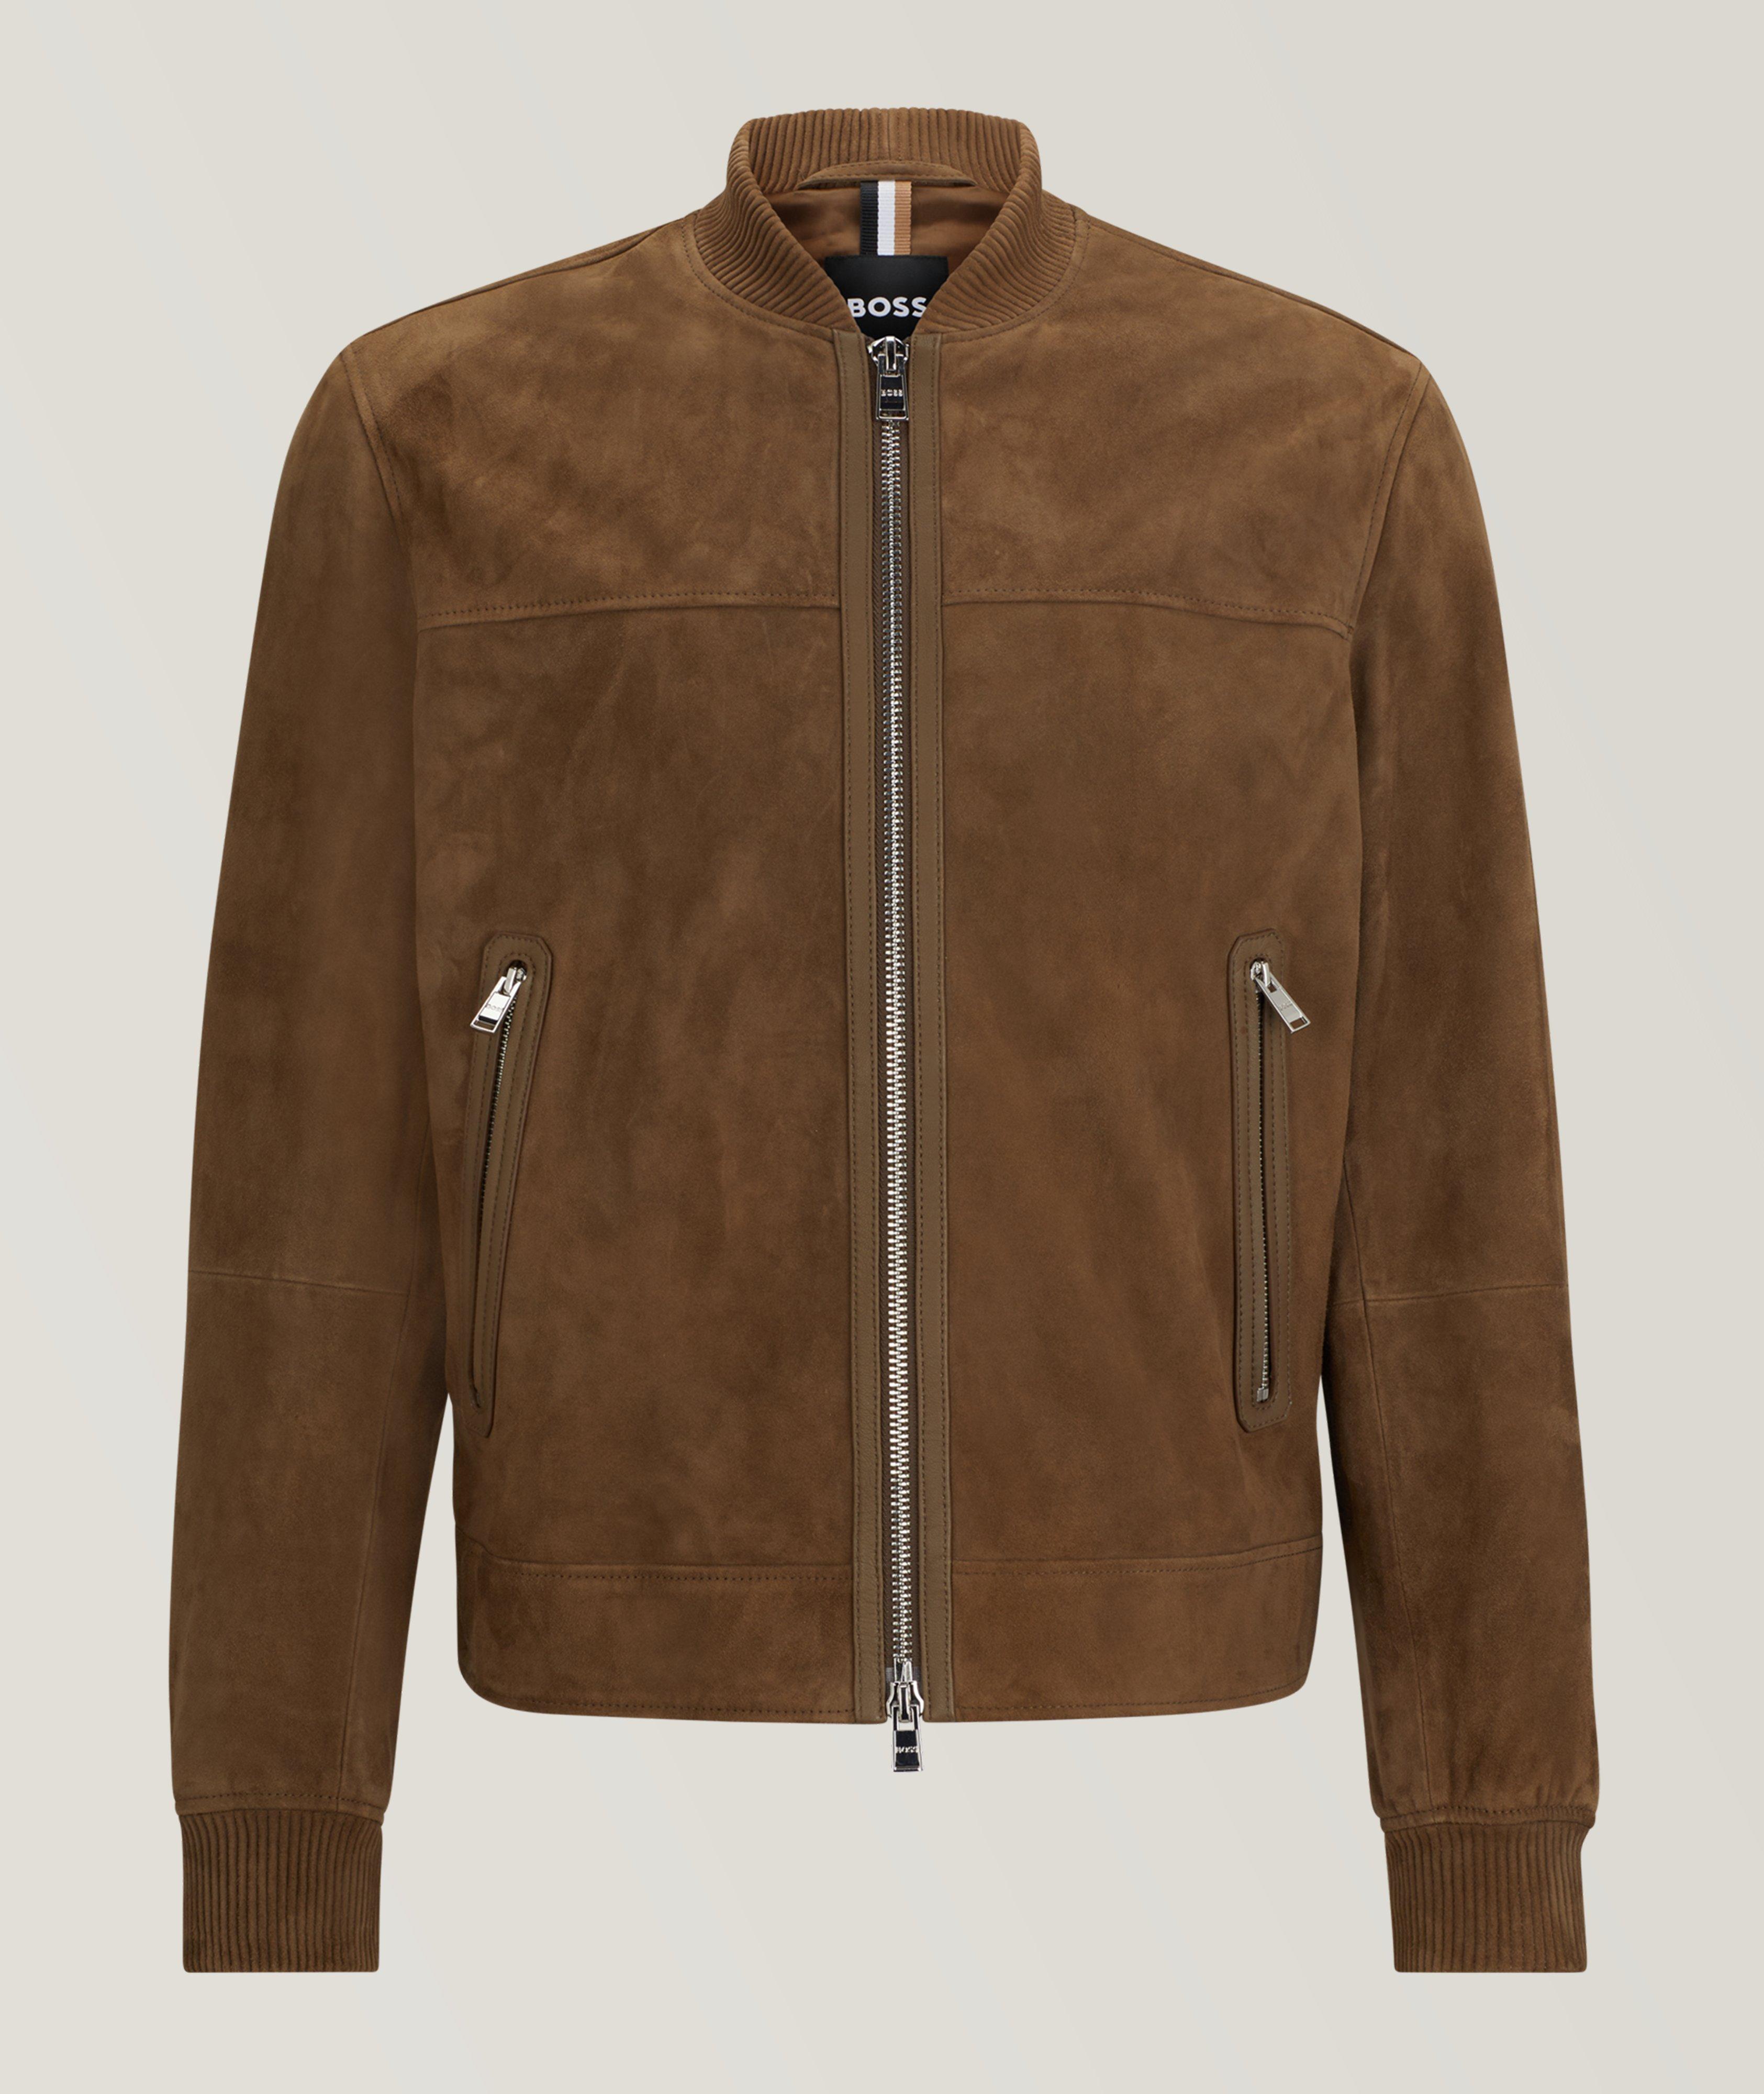 BOSS Malbano3 Suede Goat Leather Jacket